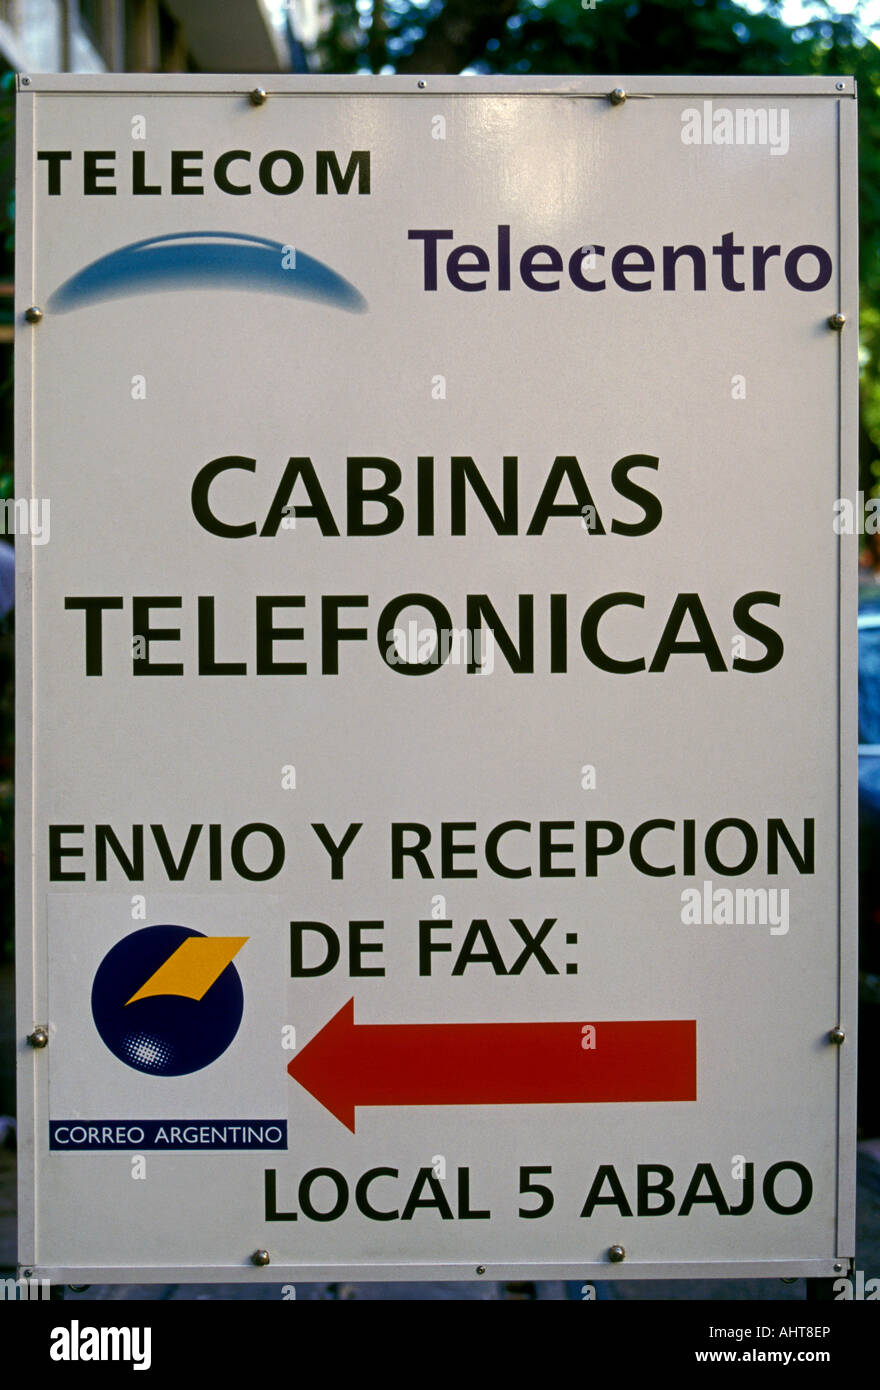 Telecom telephone company, telephone service, Buenos Aires, Buenos Aires Province, Argentina, South America Stock Photo